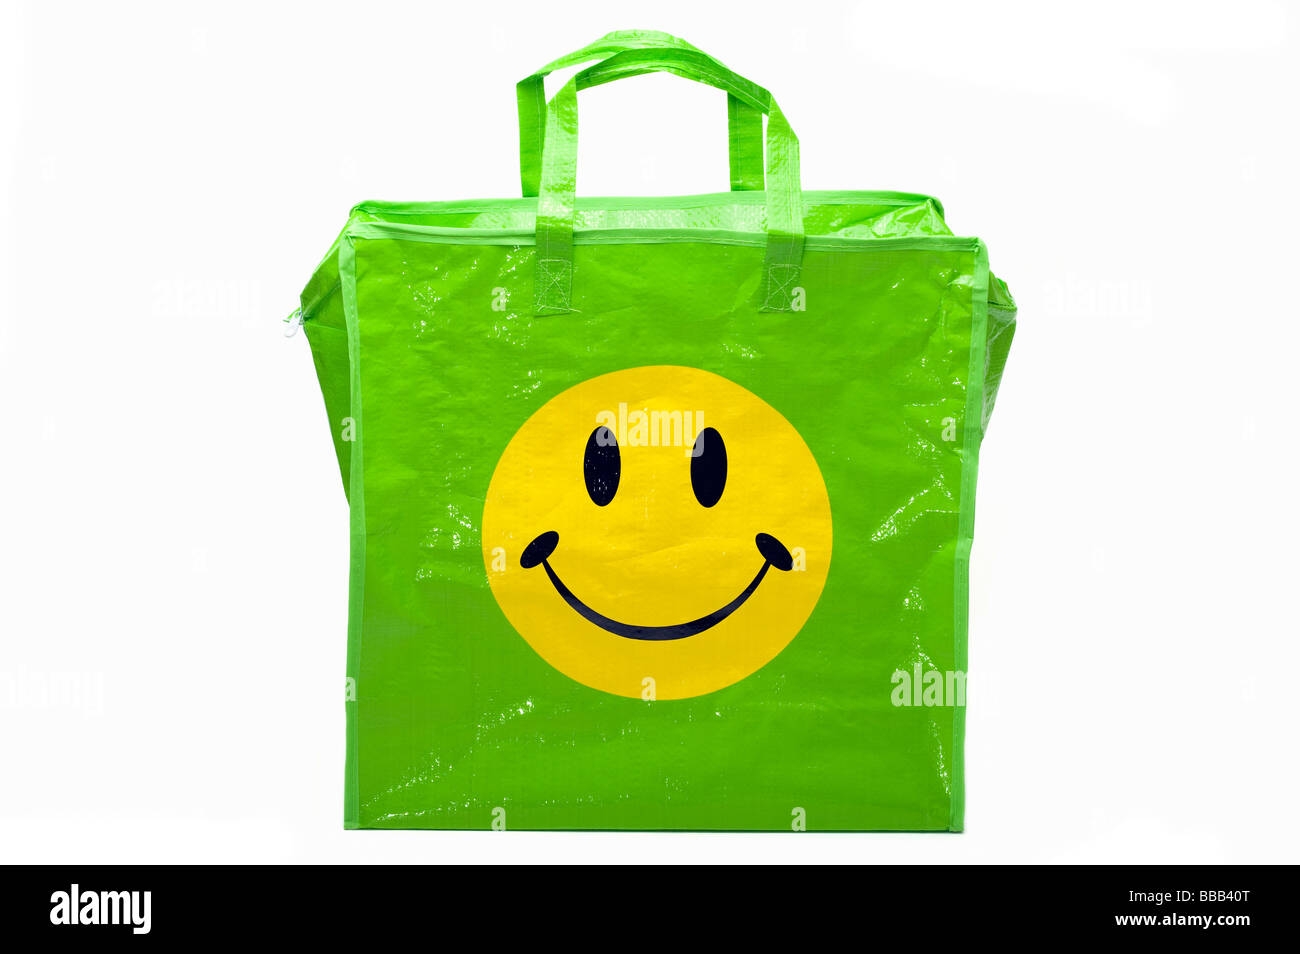 Download Green And Yellow Smiley Face On A Plastic Carrier Bag Stock Photo Alamy Yellowimages Mockups